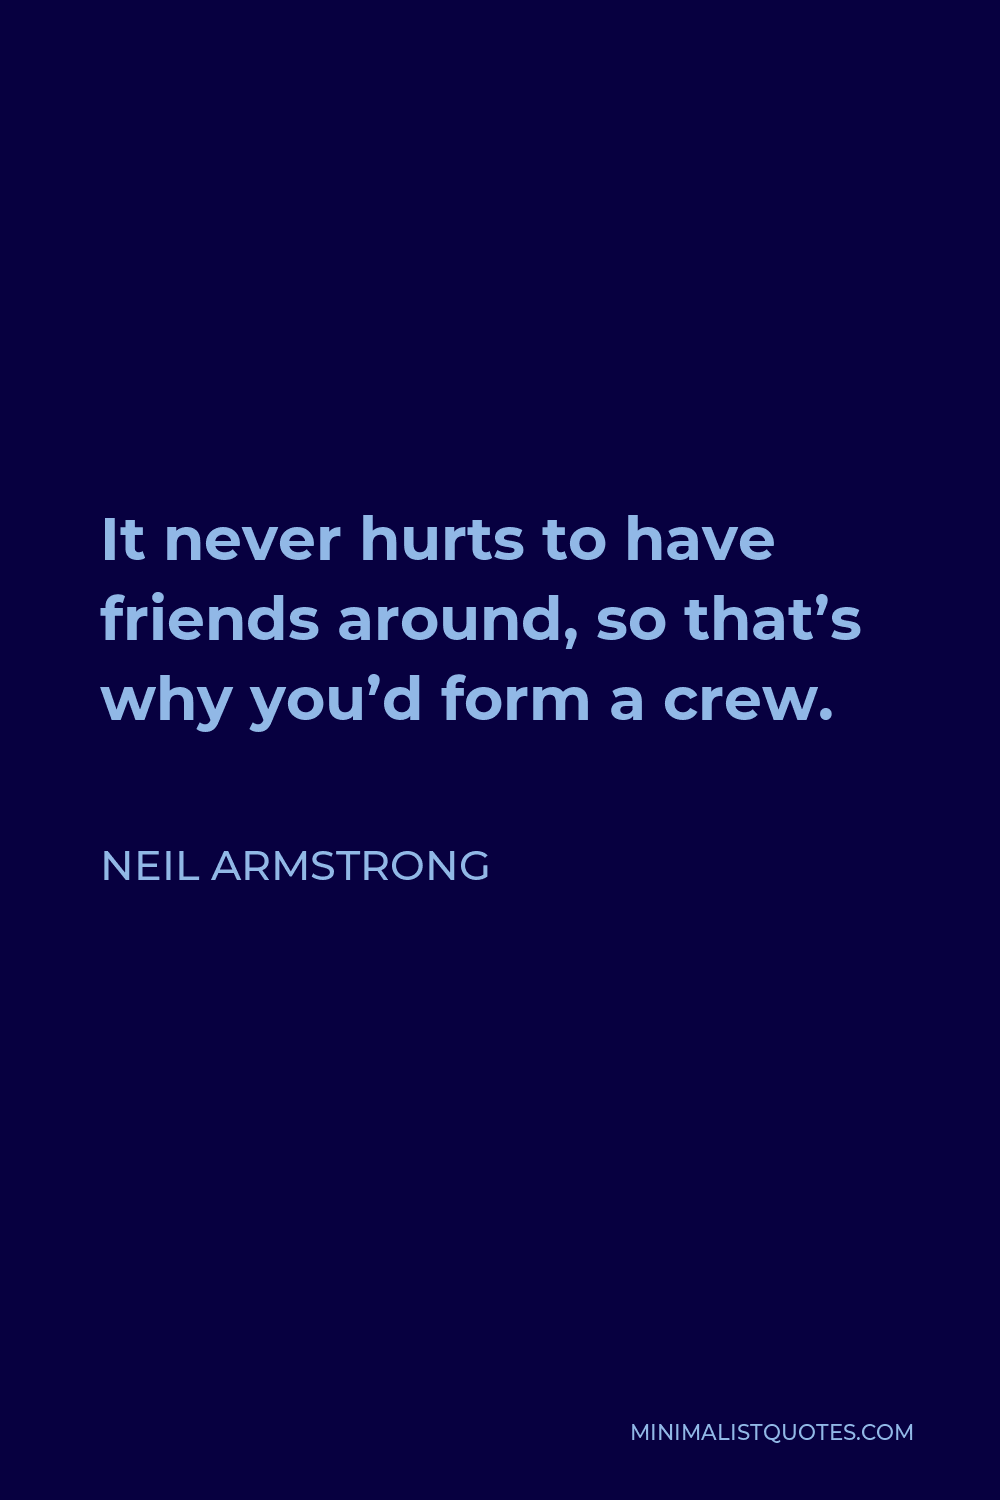 Neil Armstrong Quote - It never hurts to have friends around, so that’s why you’d form a crew.